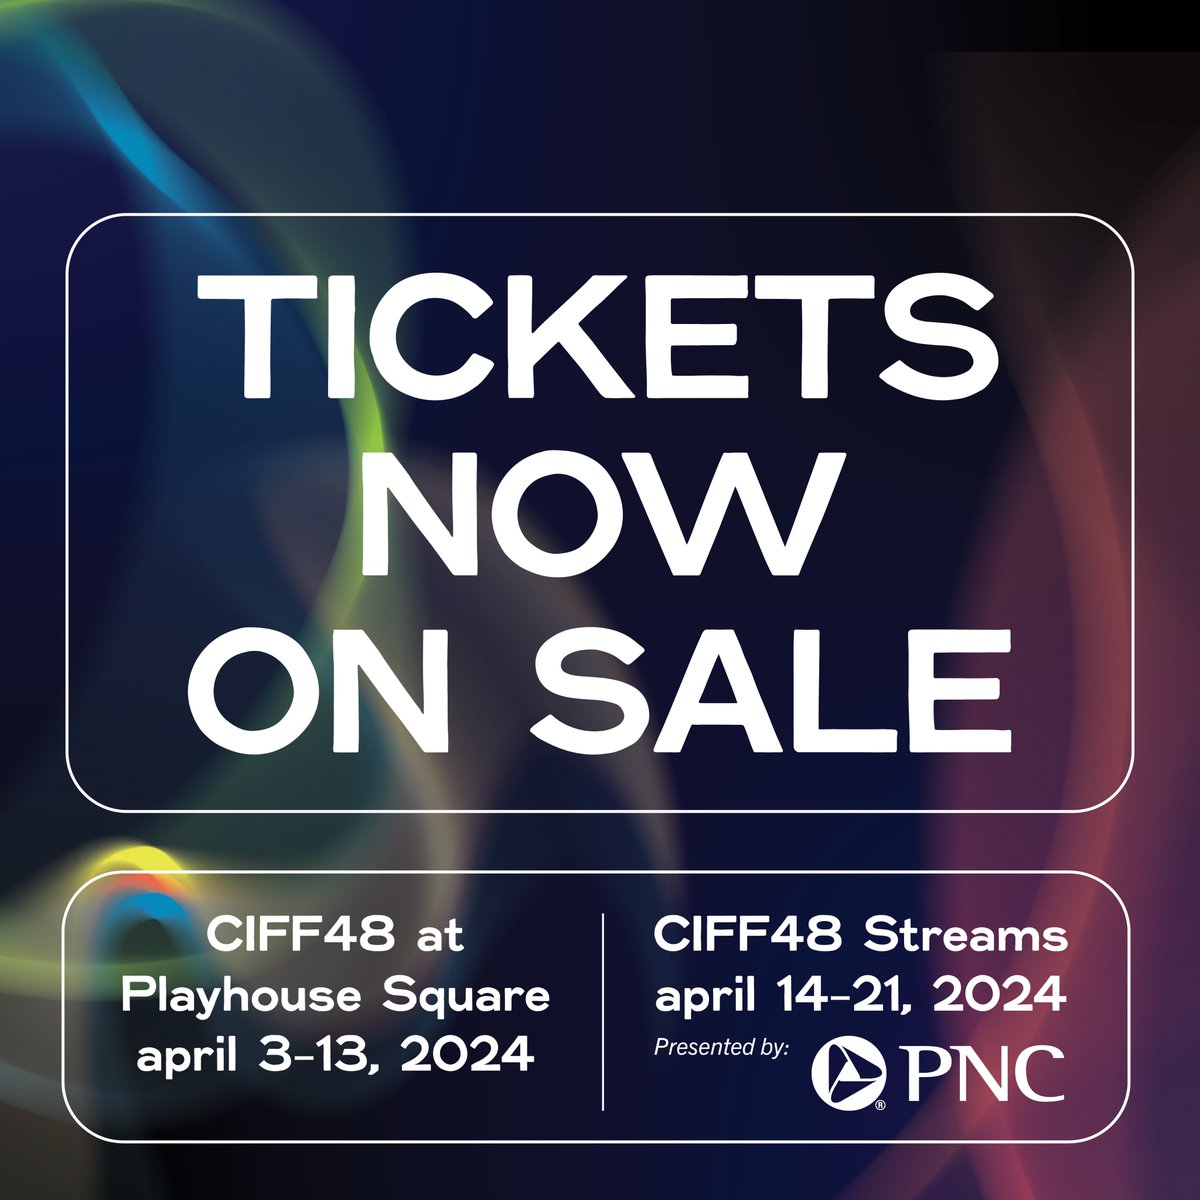 Tickets to the 48th @CIFF are now on sale! More than 360 films are part of this year’s lineup. Use discount code MEDIA48 to receive $1 off each ticket purchase! clevelandfilm.org #CIFF48 #CIFF48 #CIFF48Streams #clevelandfilm #ohiofilm #filmfestivals #ThisIsCLE